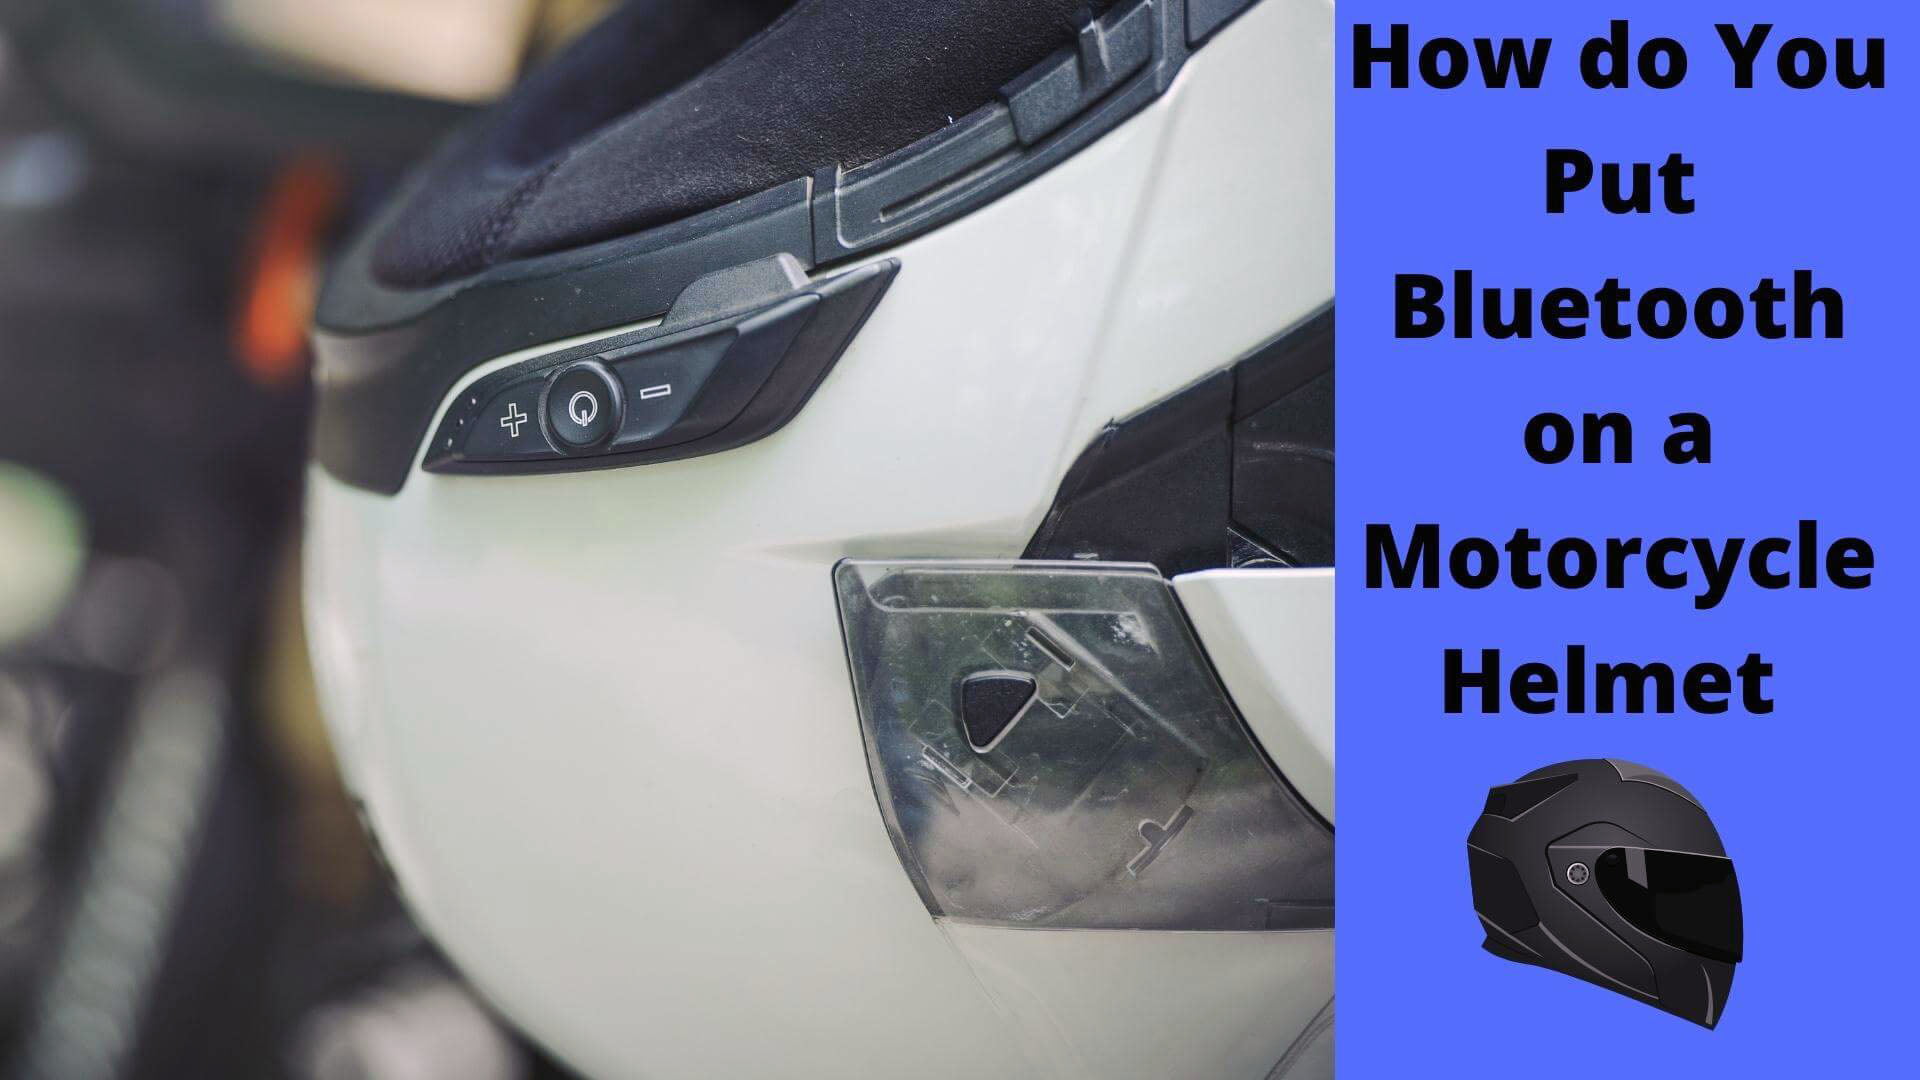 How do You Put Bluetooth on a Motorcycle Helmet for Hands-free Communications